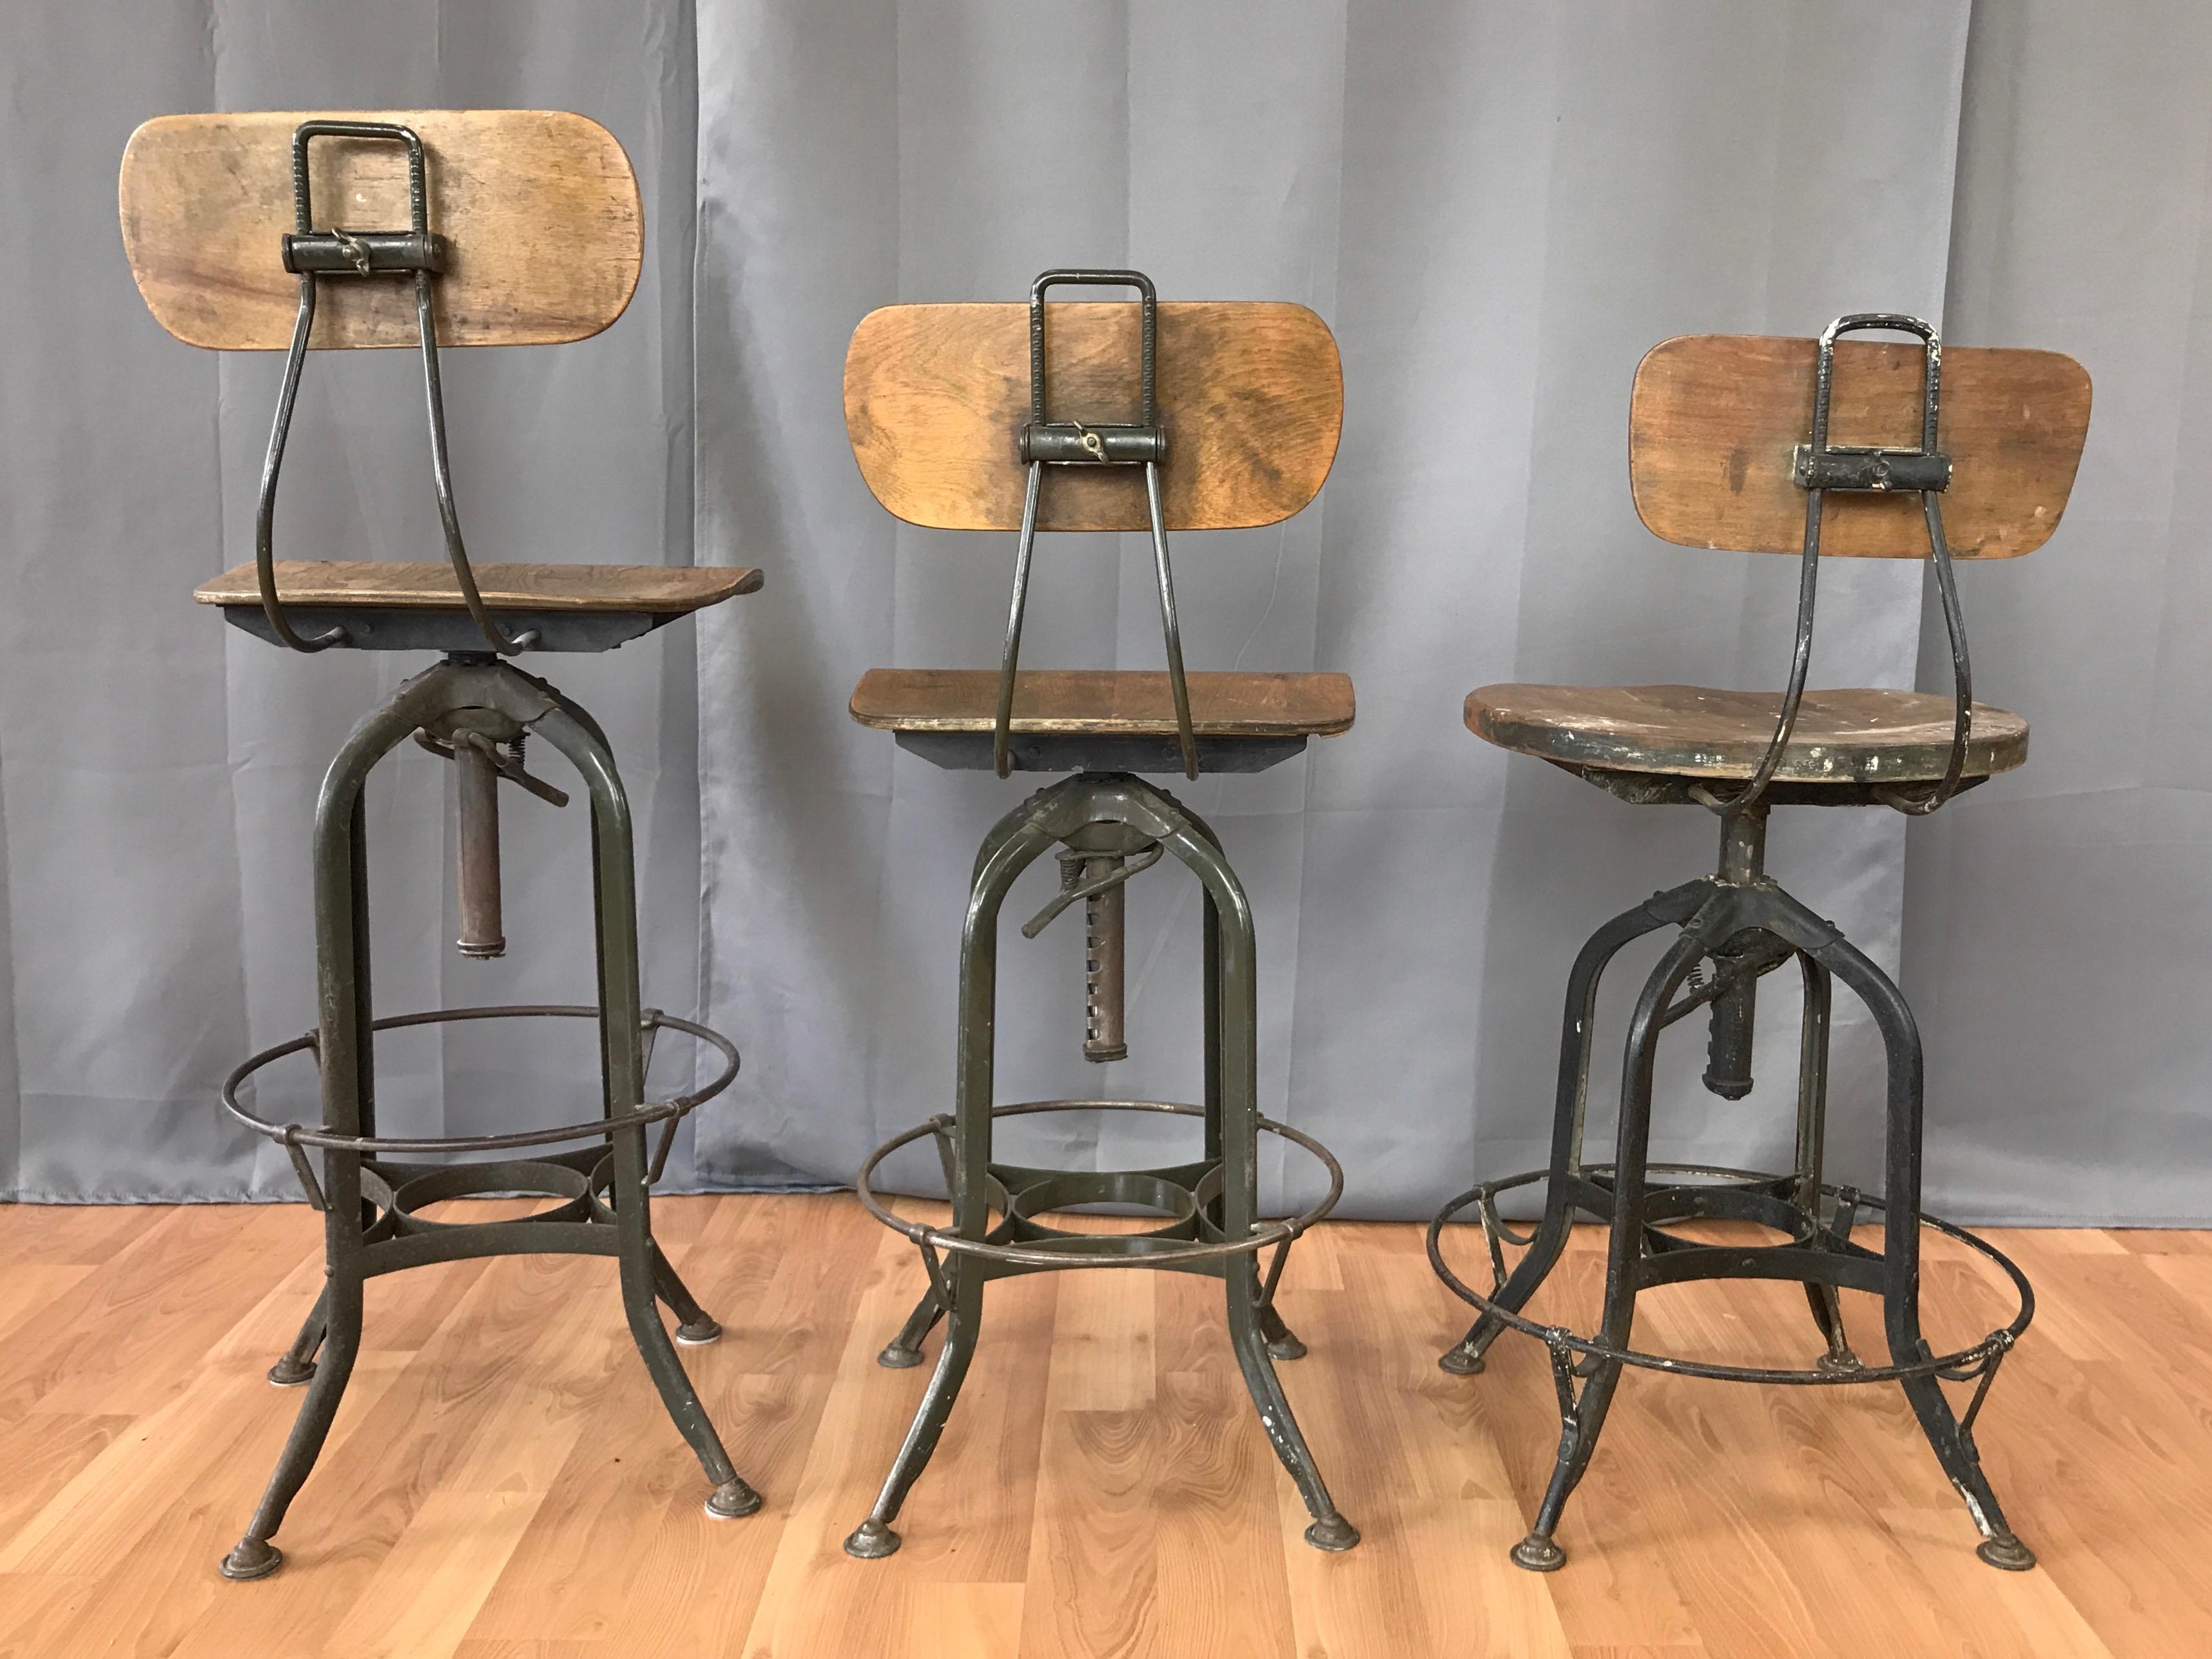 Toledo Industrial Adjustable Height Swivel Stools with Backs, Two Available 4